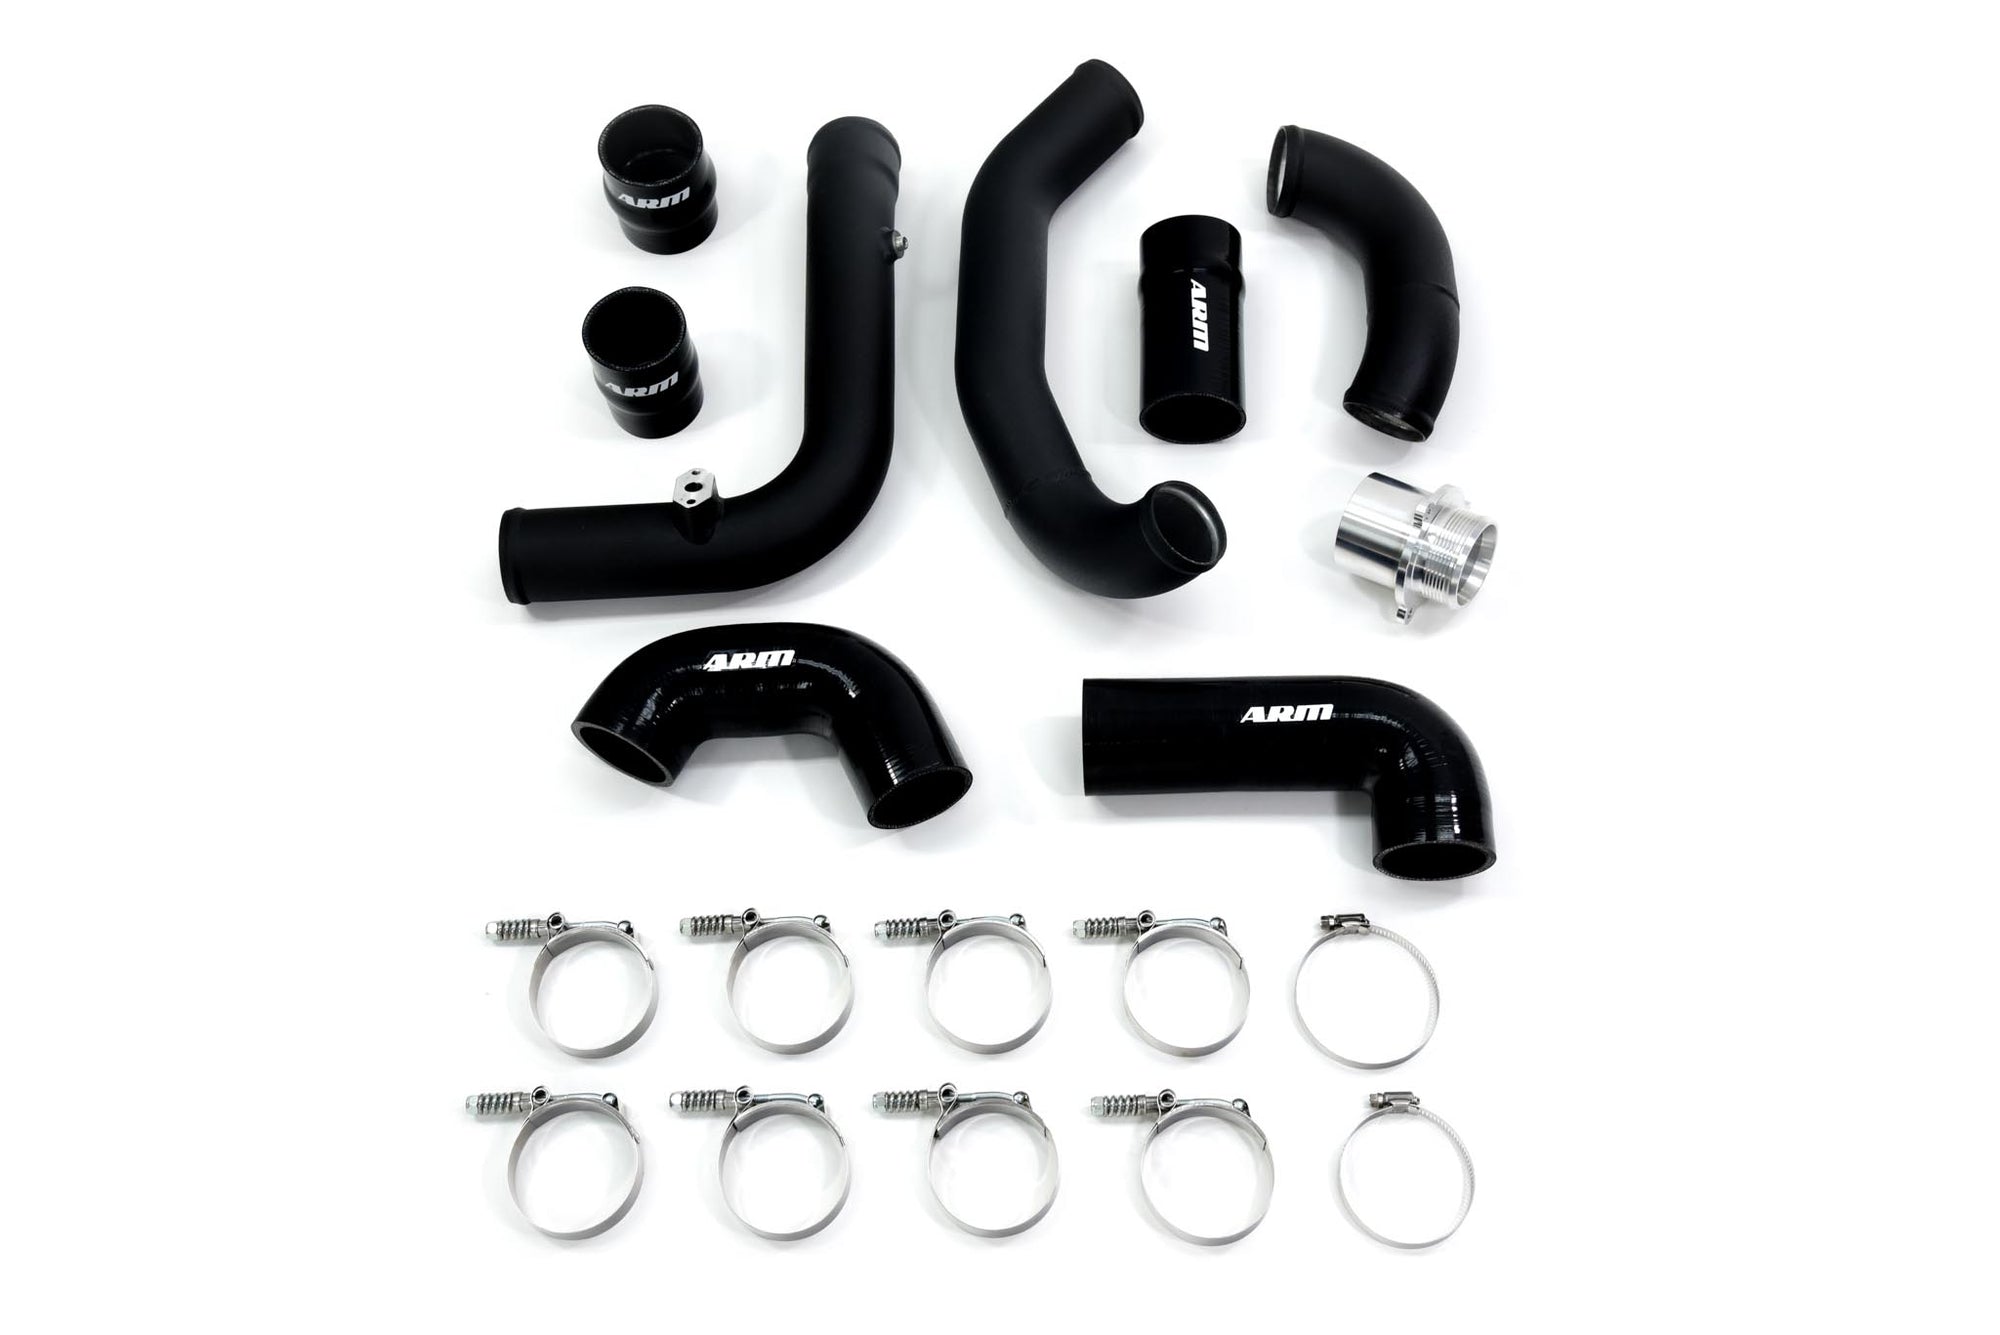 MK7 GTI CHARGE PIPES - ARM Motorsports